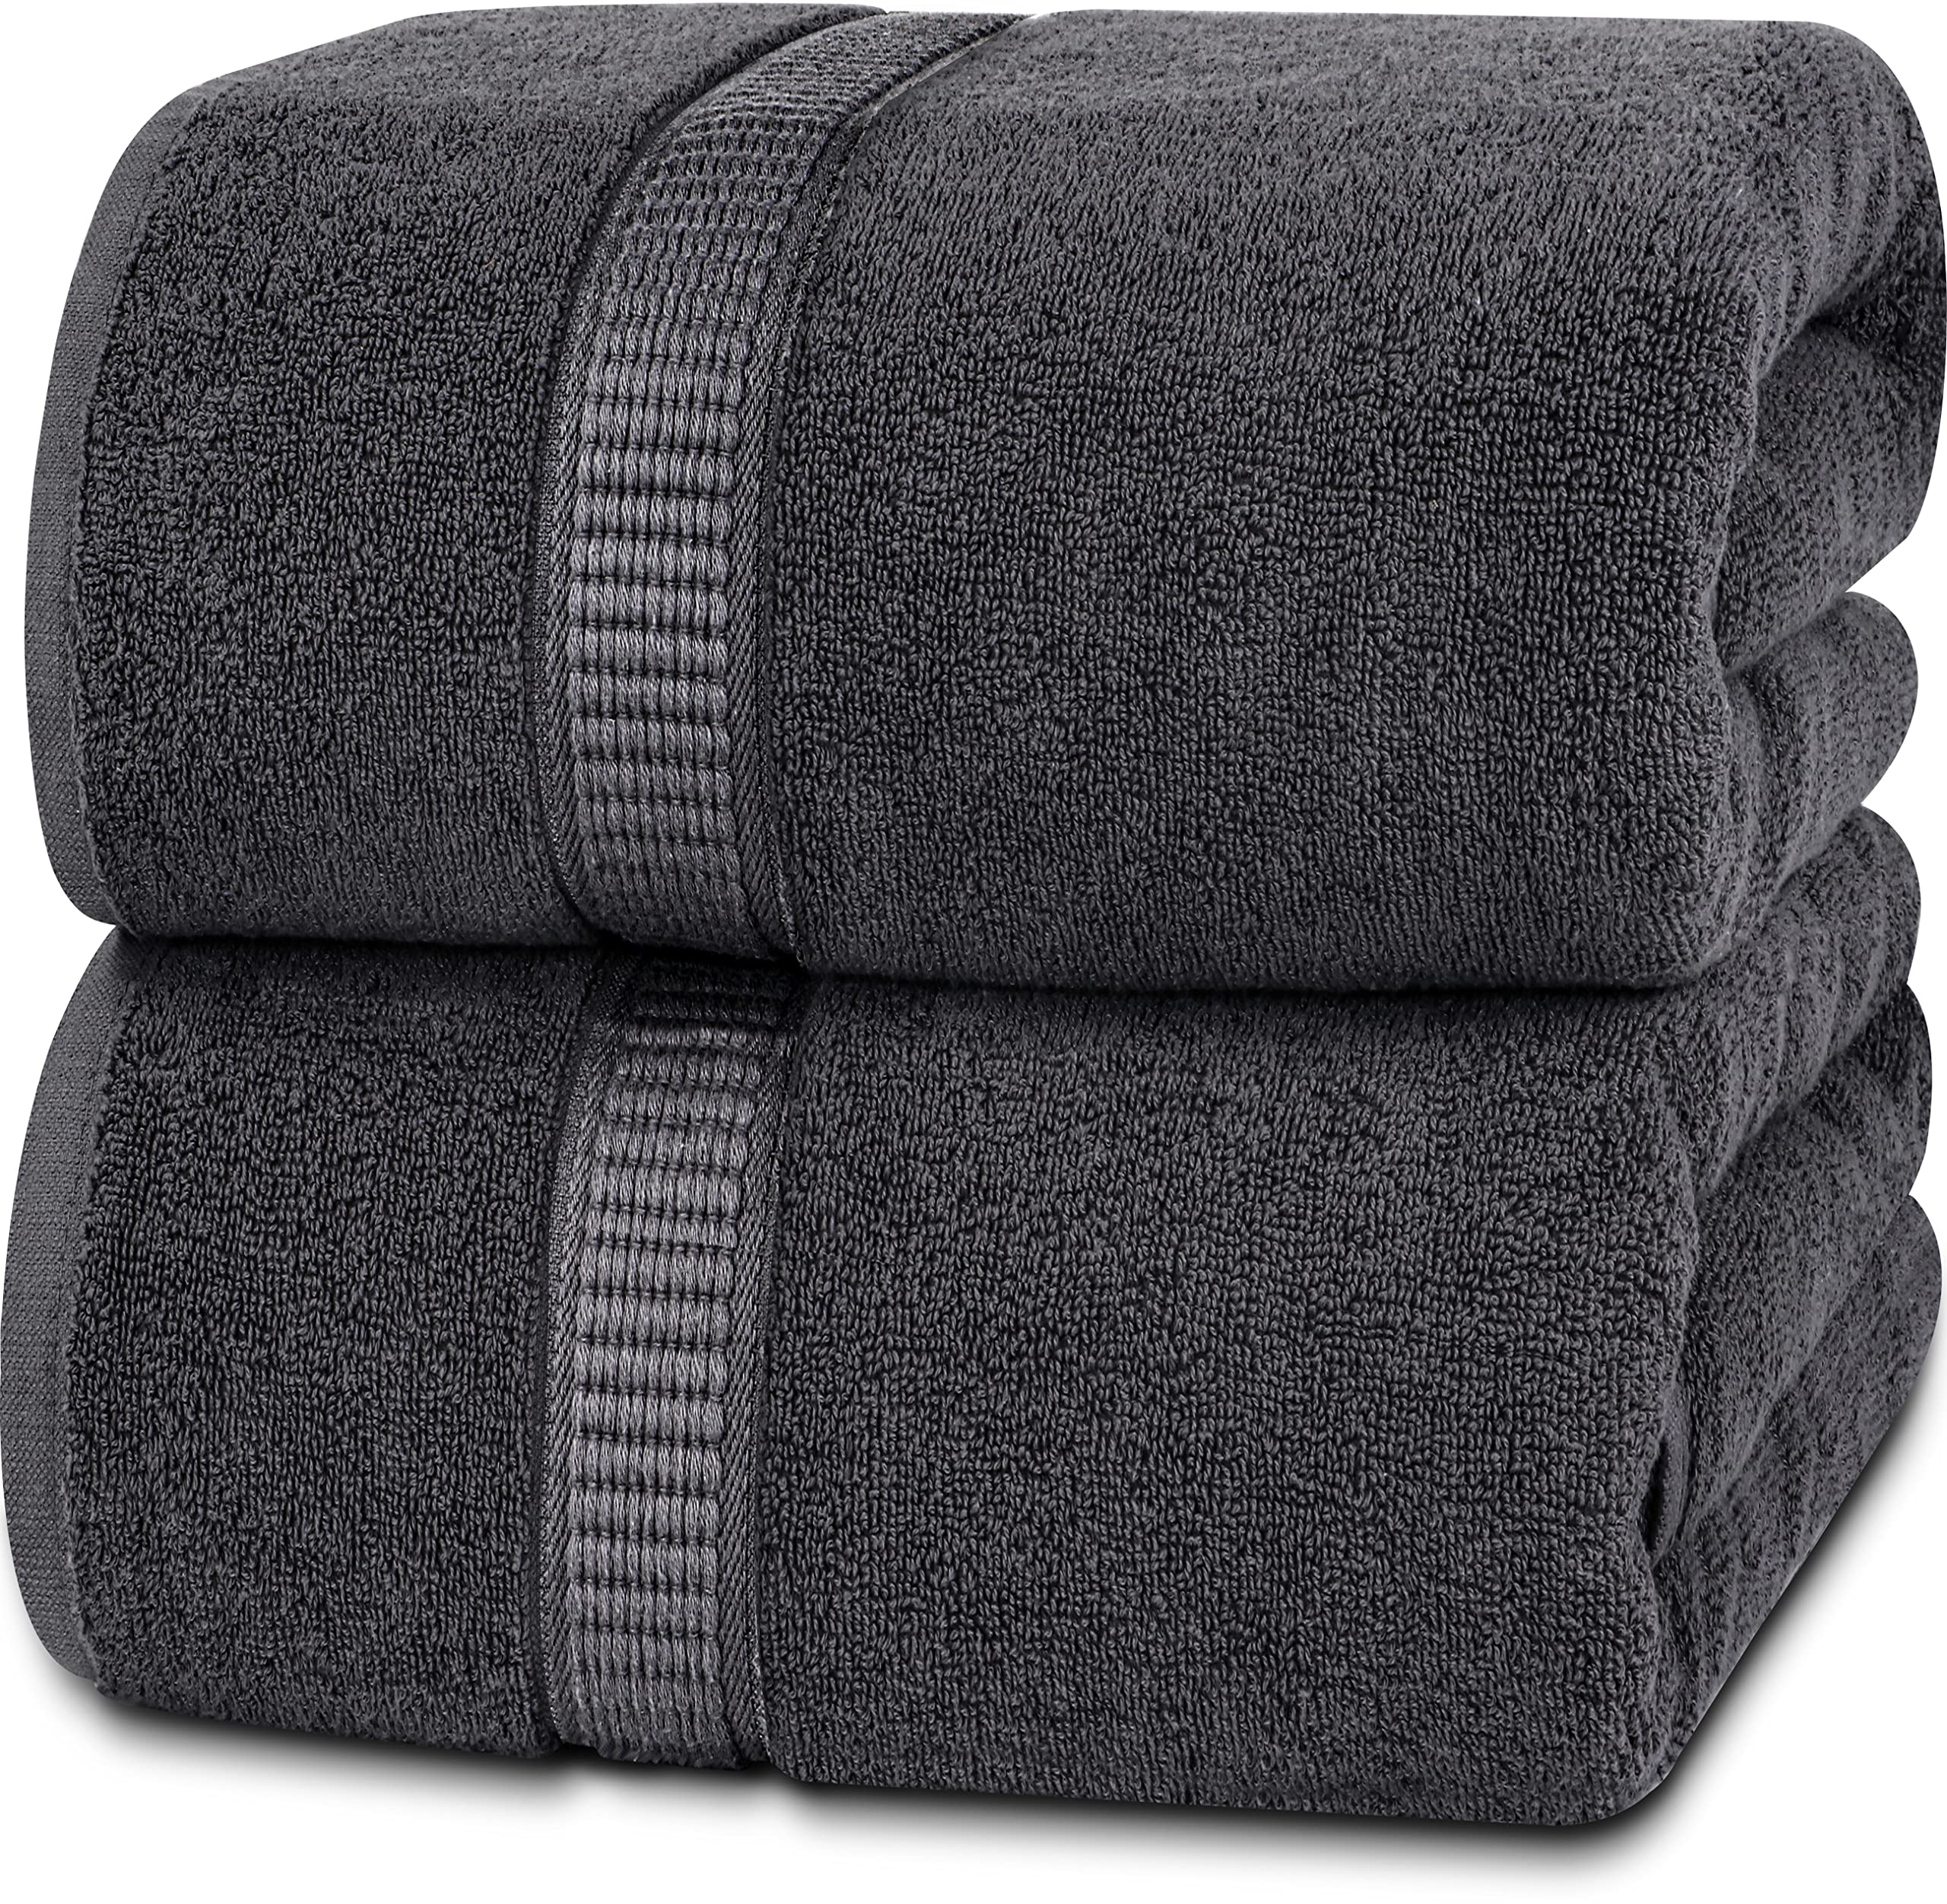 Oversized Bath Towels Set of 4, Dark Gray Extra Large Bath Sheets Towels for Adults 35x70in, 600 GSM Ultra Soft Bathroom Towels Microfiber Quick Dry